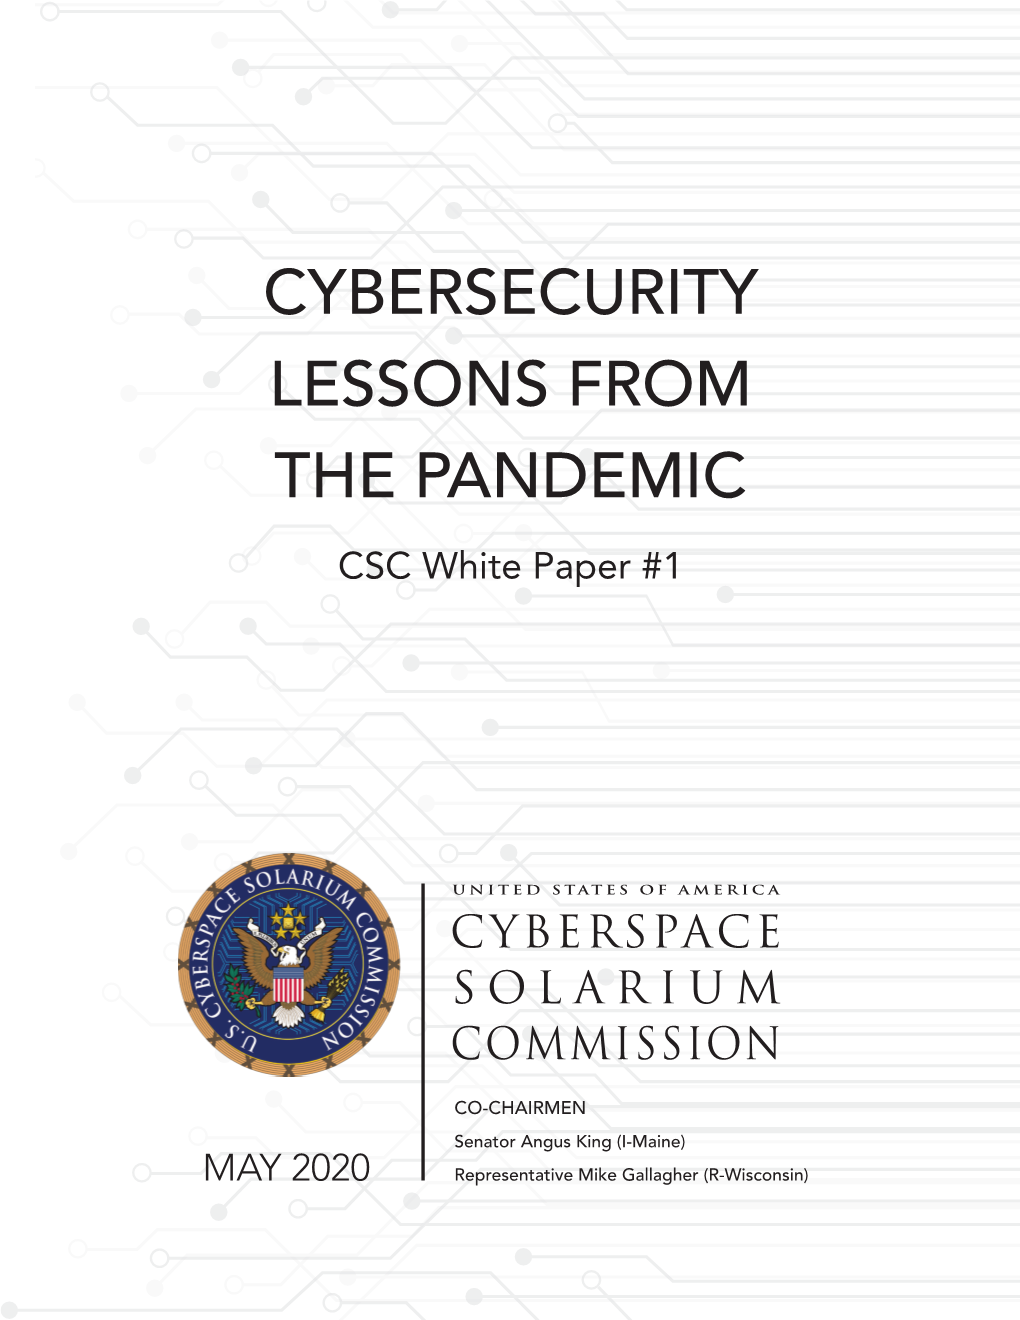 [CSC] Cybersecurity Lessons Learned from the Pandemic